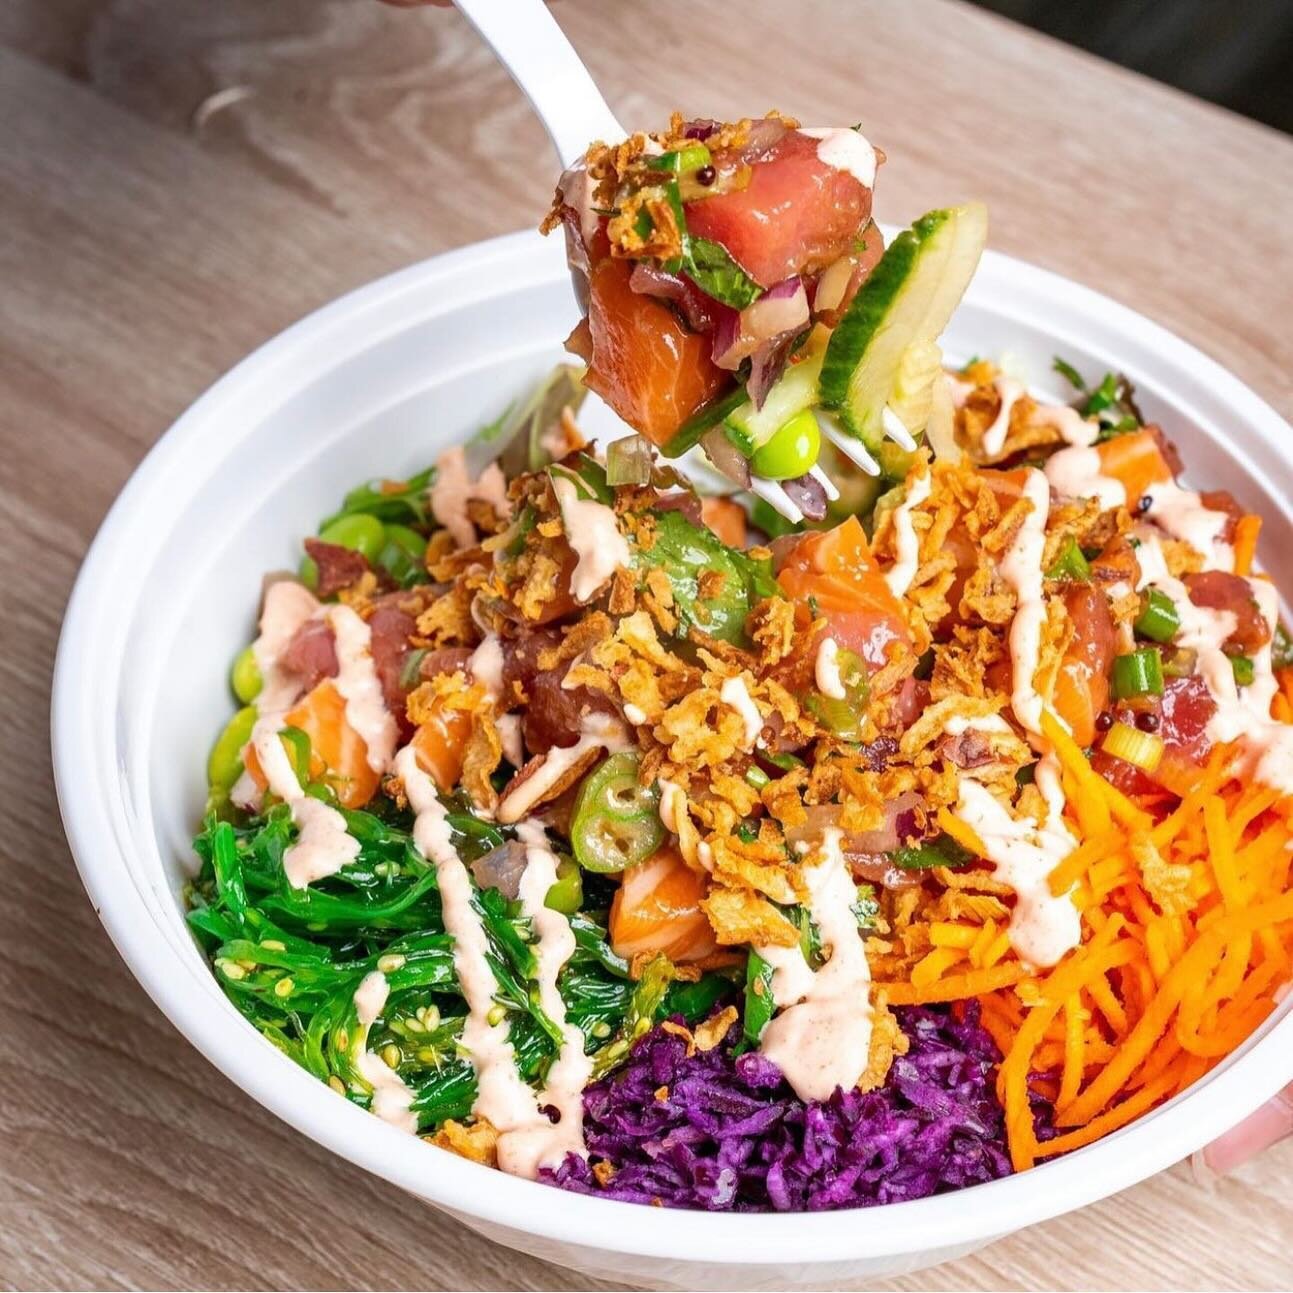 Start your week off with a veggie 🥕and protein 🐟packed poke bowl at @charmcitypokemochi ! Don&rsquo;t forget to also treat yourself to one (or six 😉) of their iconic mochi donuts 🍩.

Order online or in-store for lunch or dinner any day of the wee